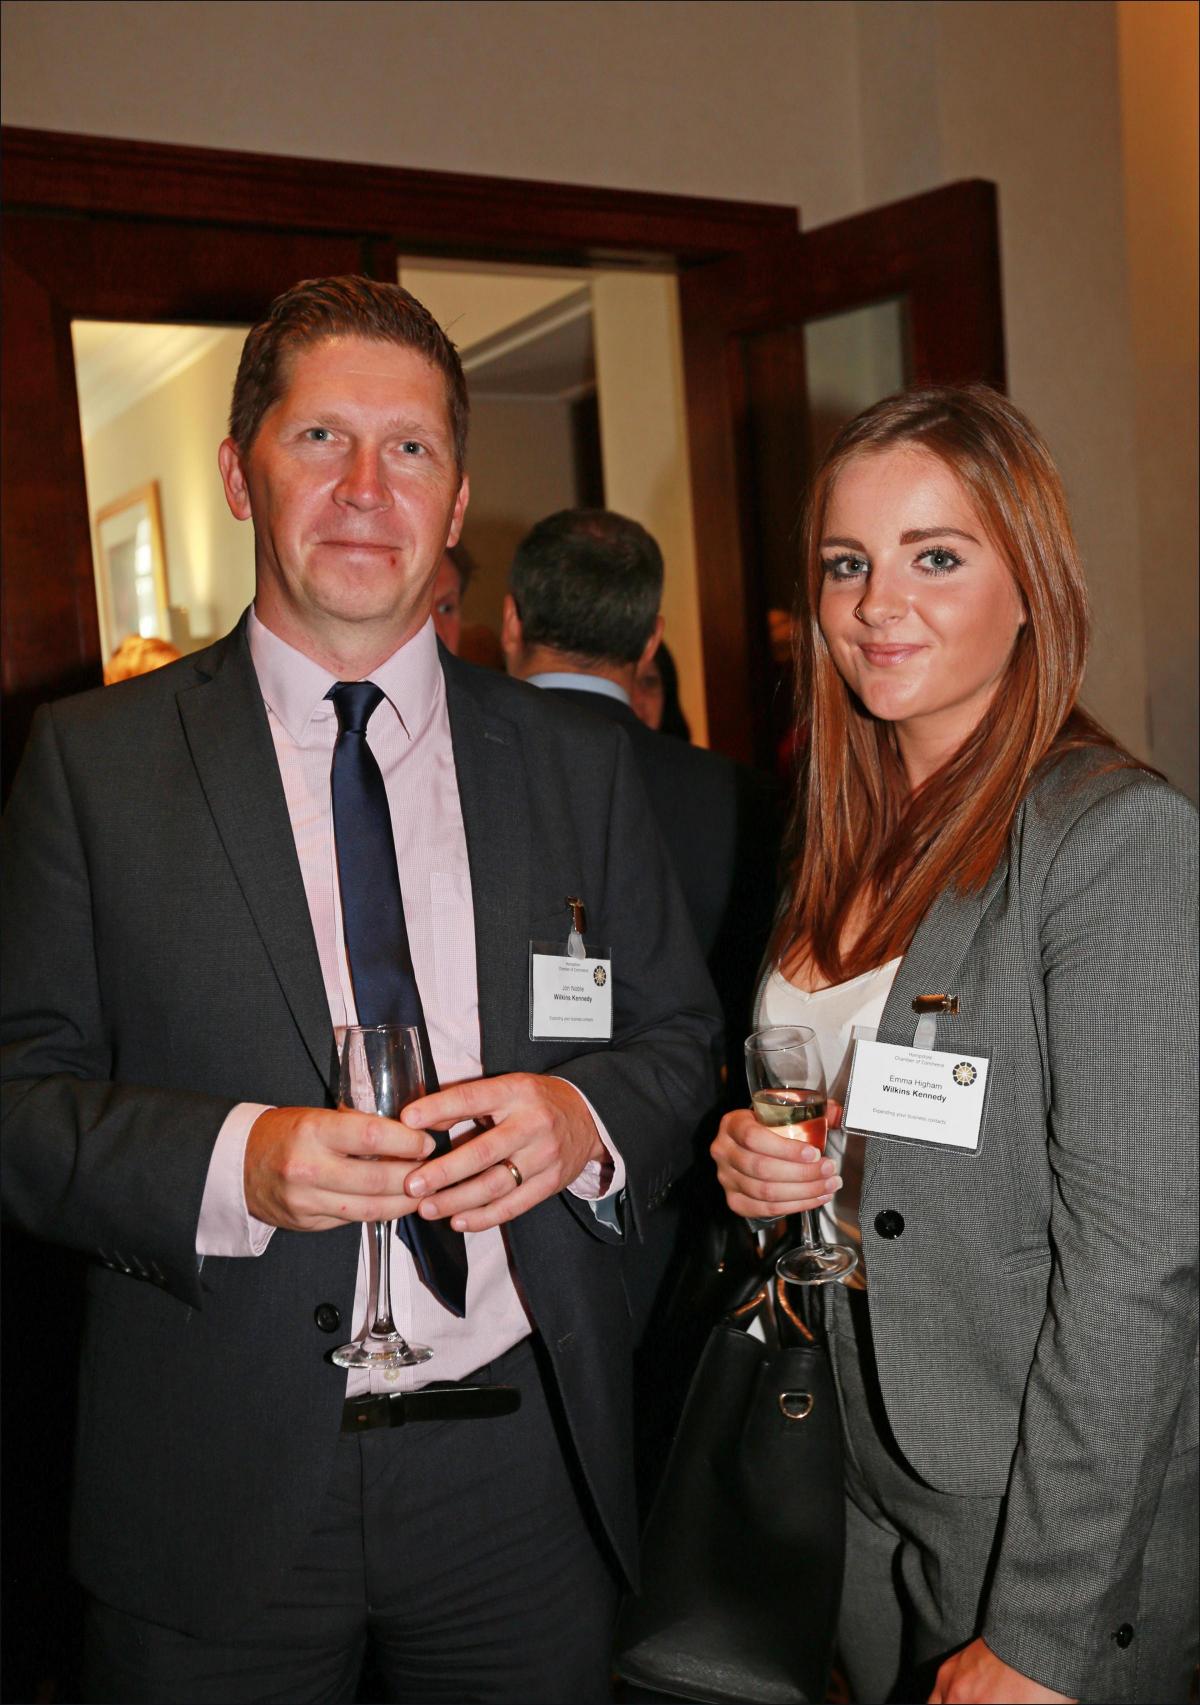 Hampshire Chamber of Commerce hosted a Boatshow lunch at the Grand Harbour Hotel in Southampton. Jon Noble and Emma Higham